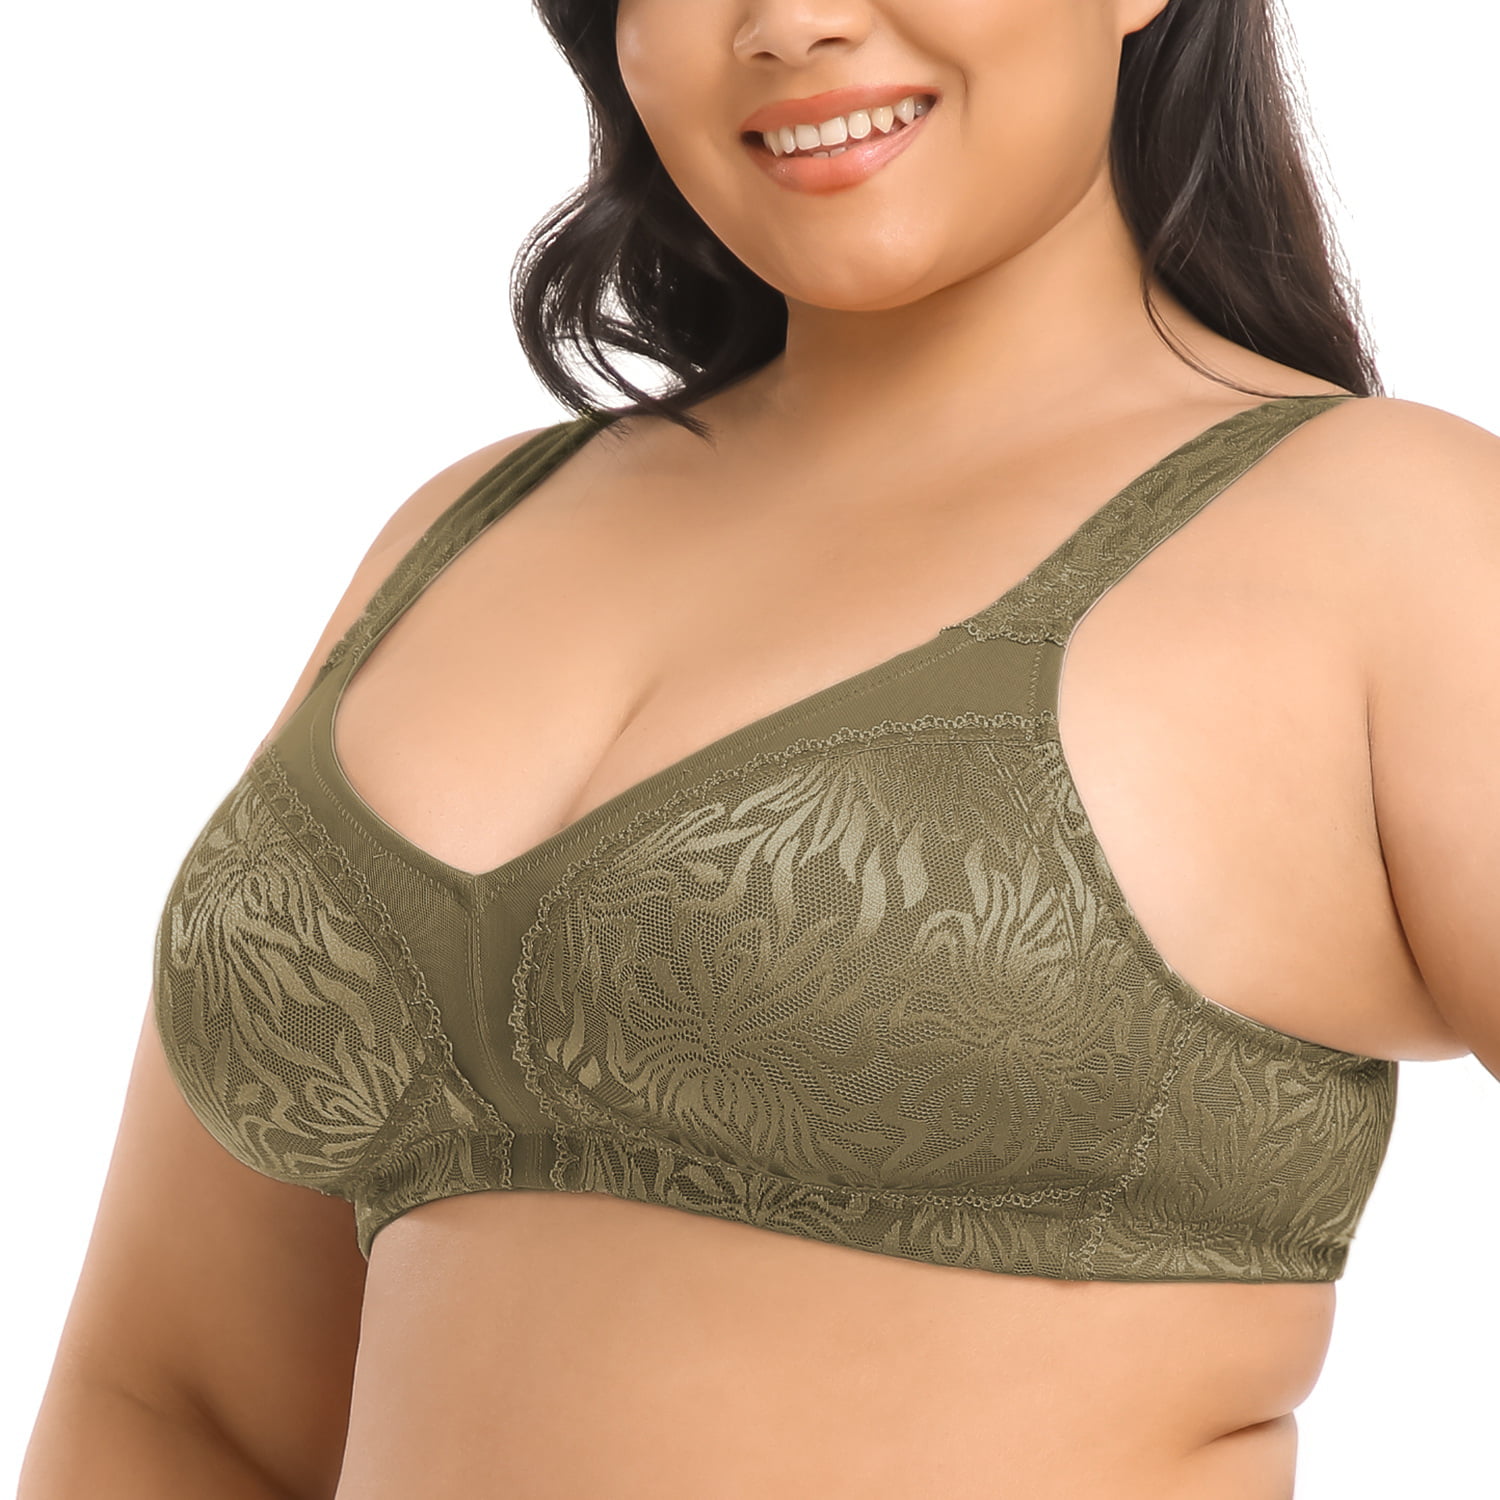 Womens Plus Size Lace Minimizer Non Wired Bras Unlined Full Cup, Wireless &  Customizable Straps D XXXL From Yanqin03, $16.74